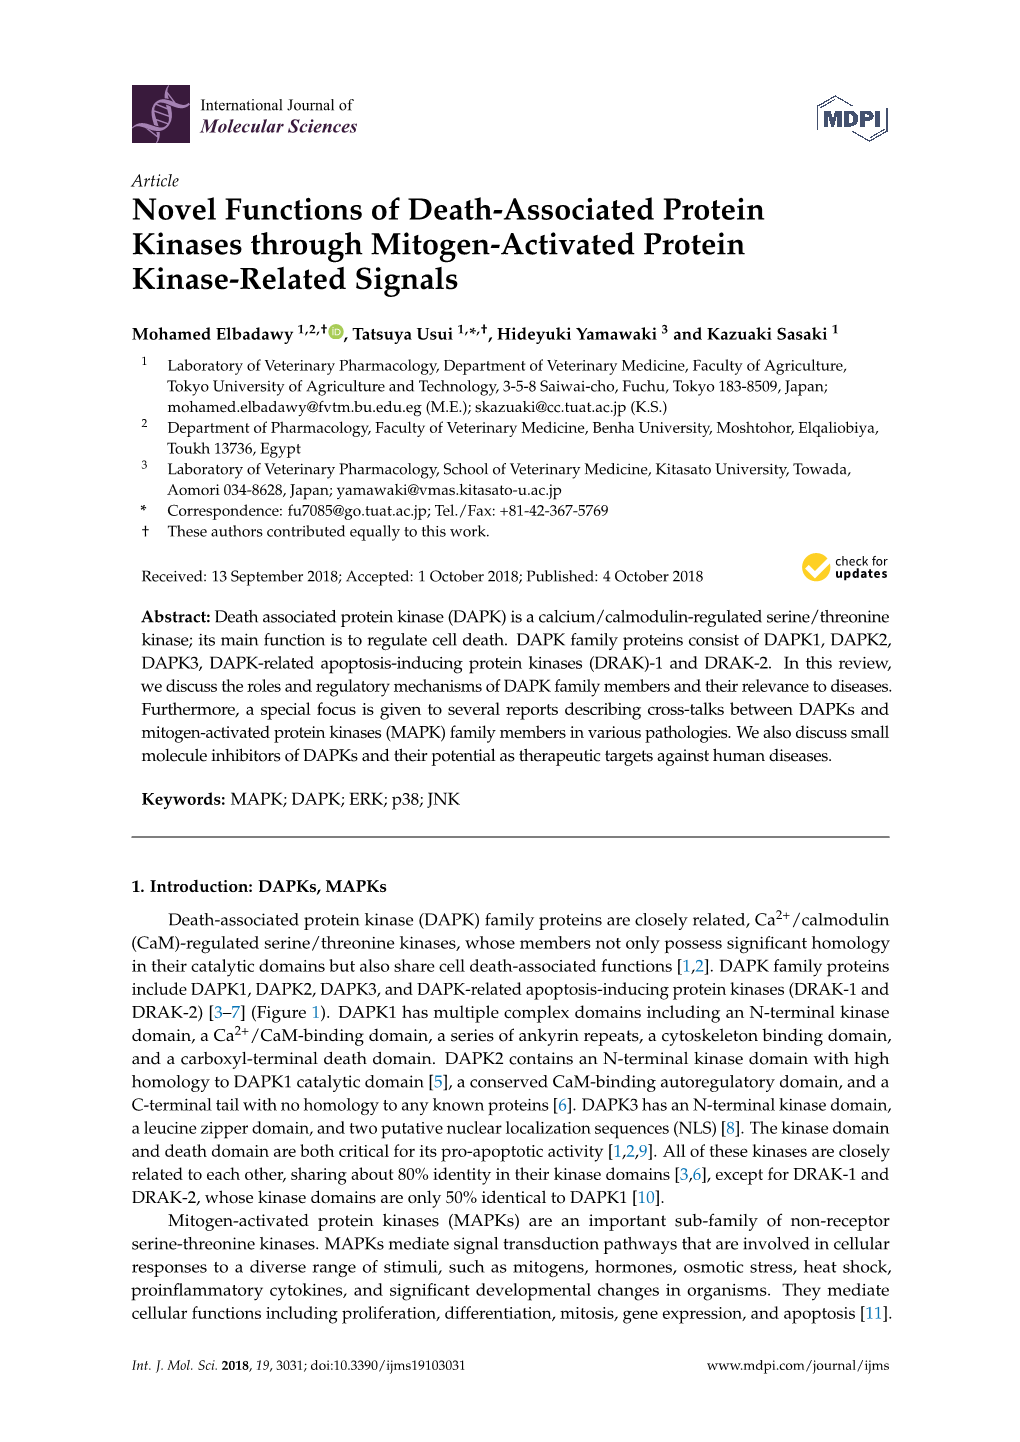 Novel Functions of Death-Associated Protein Kinases Through Mitogen-Activated Protein Kinase-Related Signals